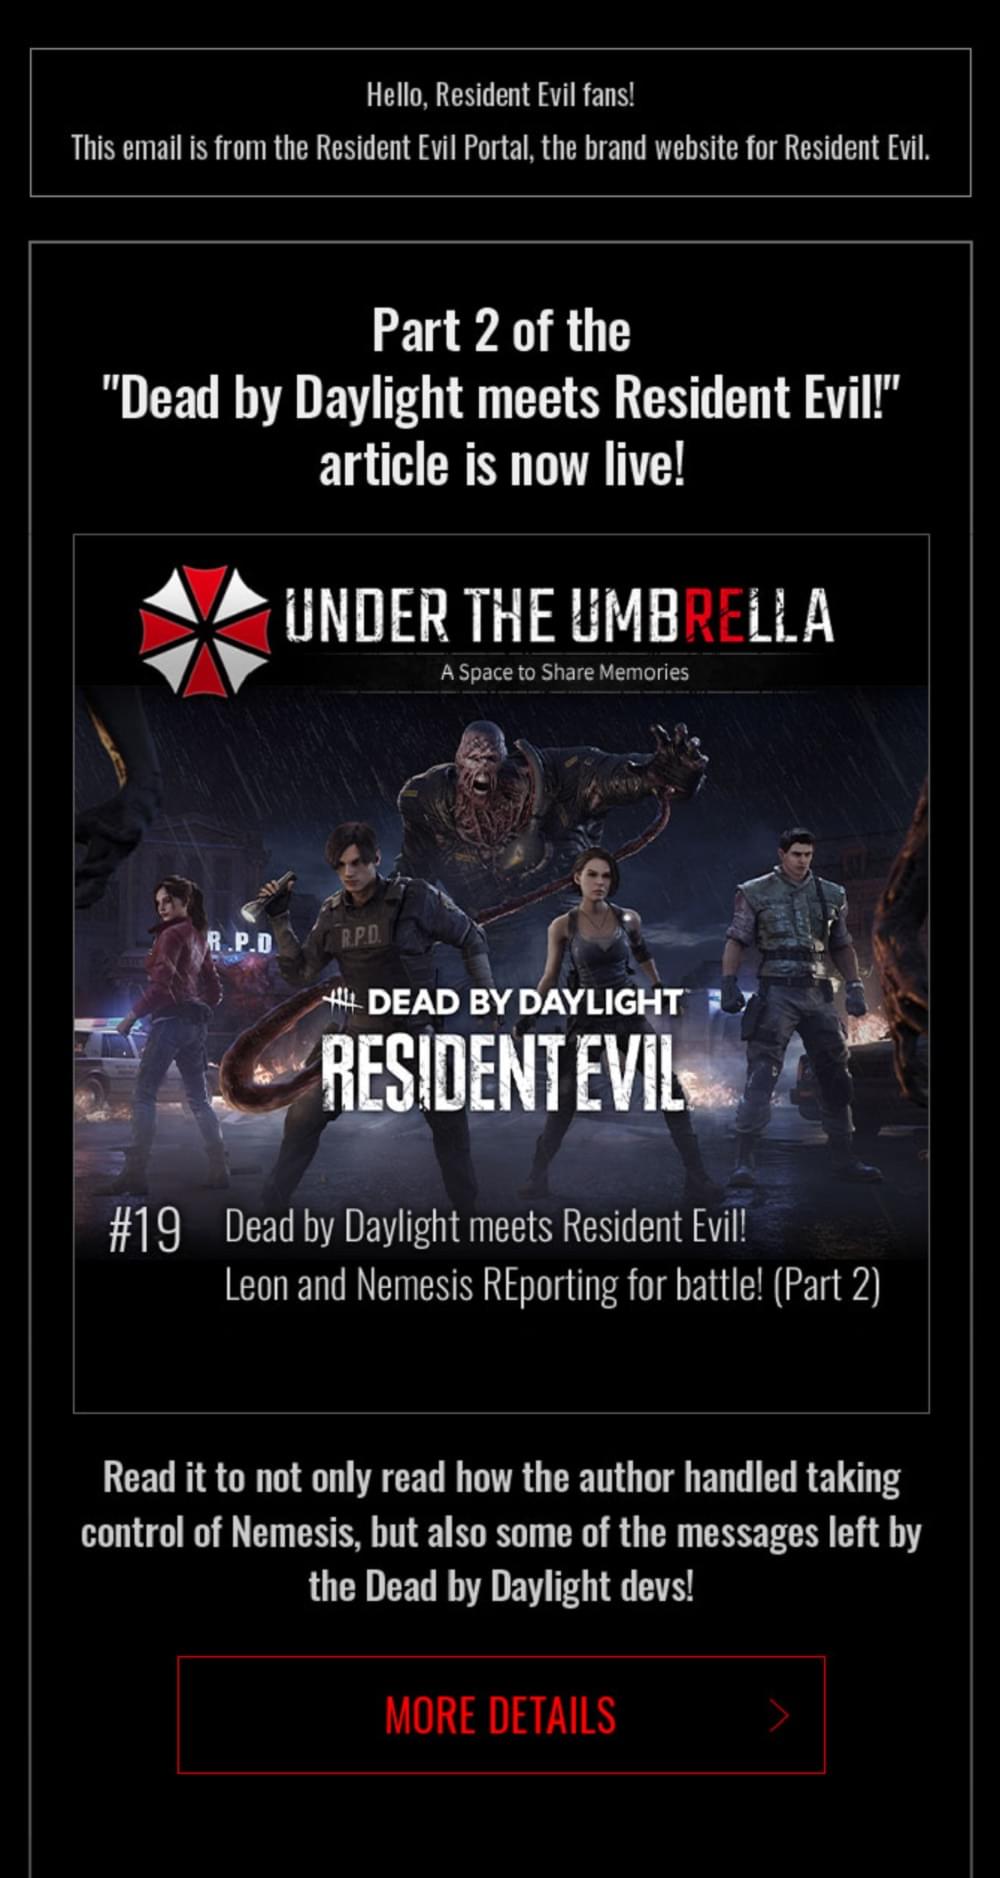 Dead by Daylight meets Resident Evil!